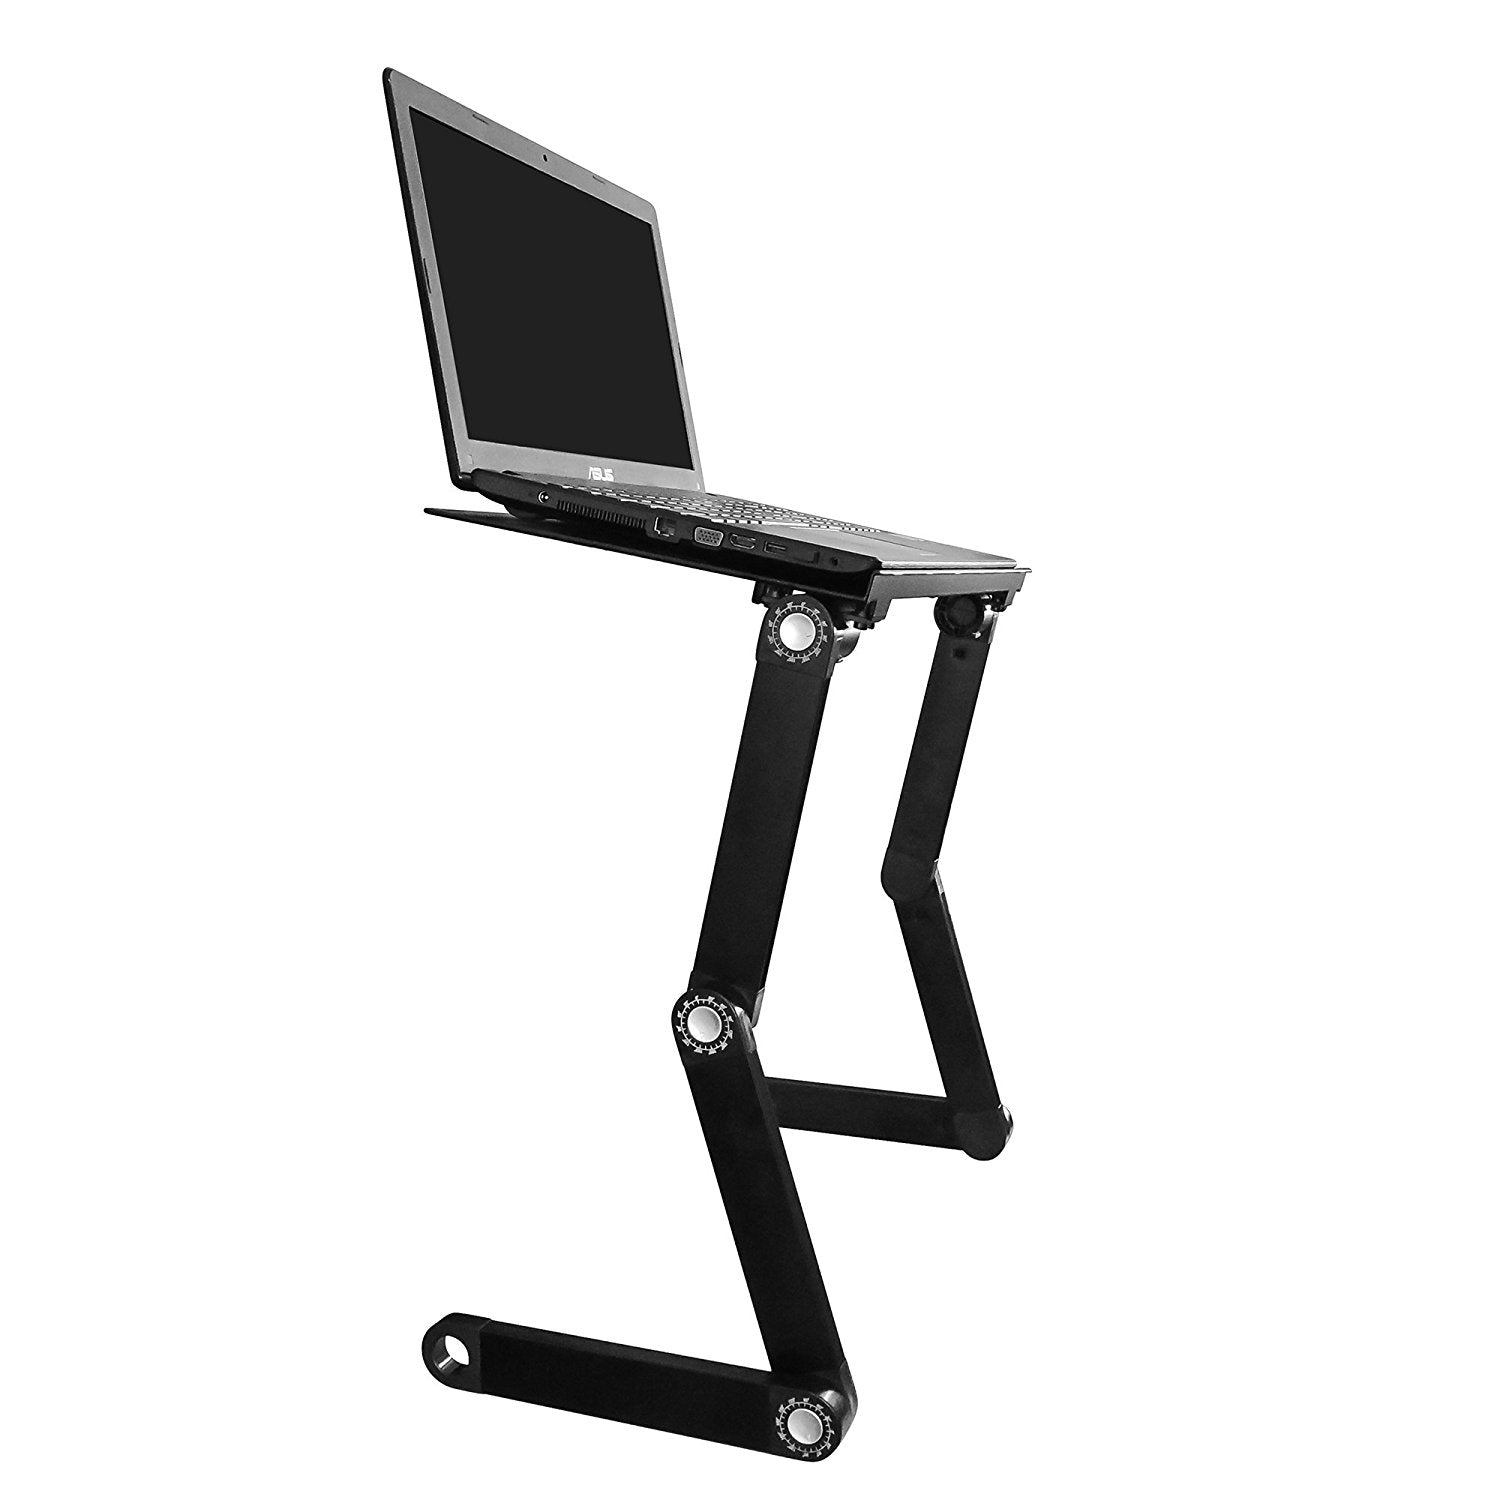 Officewerks Adjustable and Portable Computer Laptop Stand/Desk with Mouse Pad, Ergonomic Design - RingBinderDepot.com